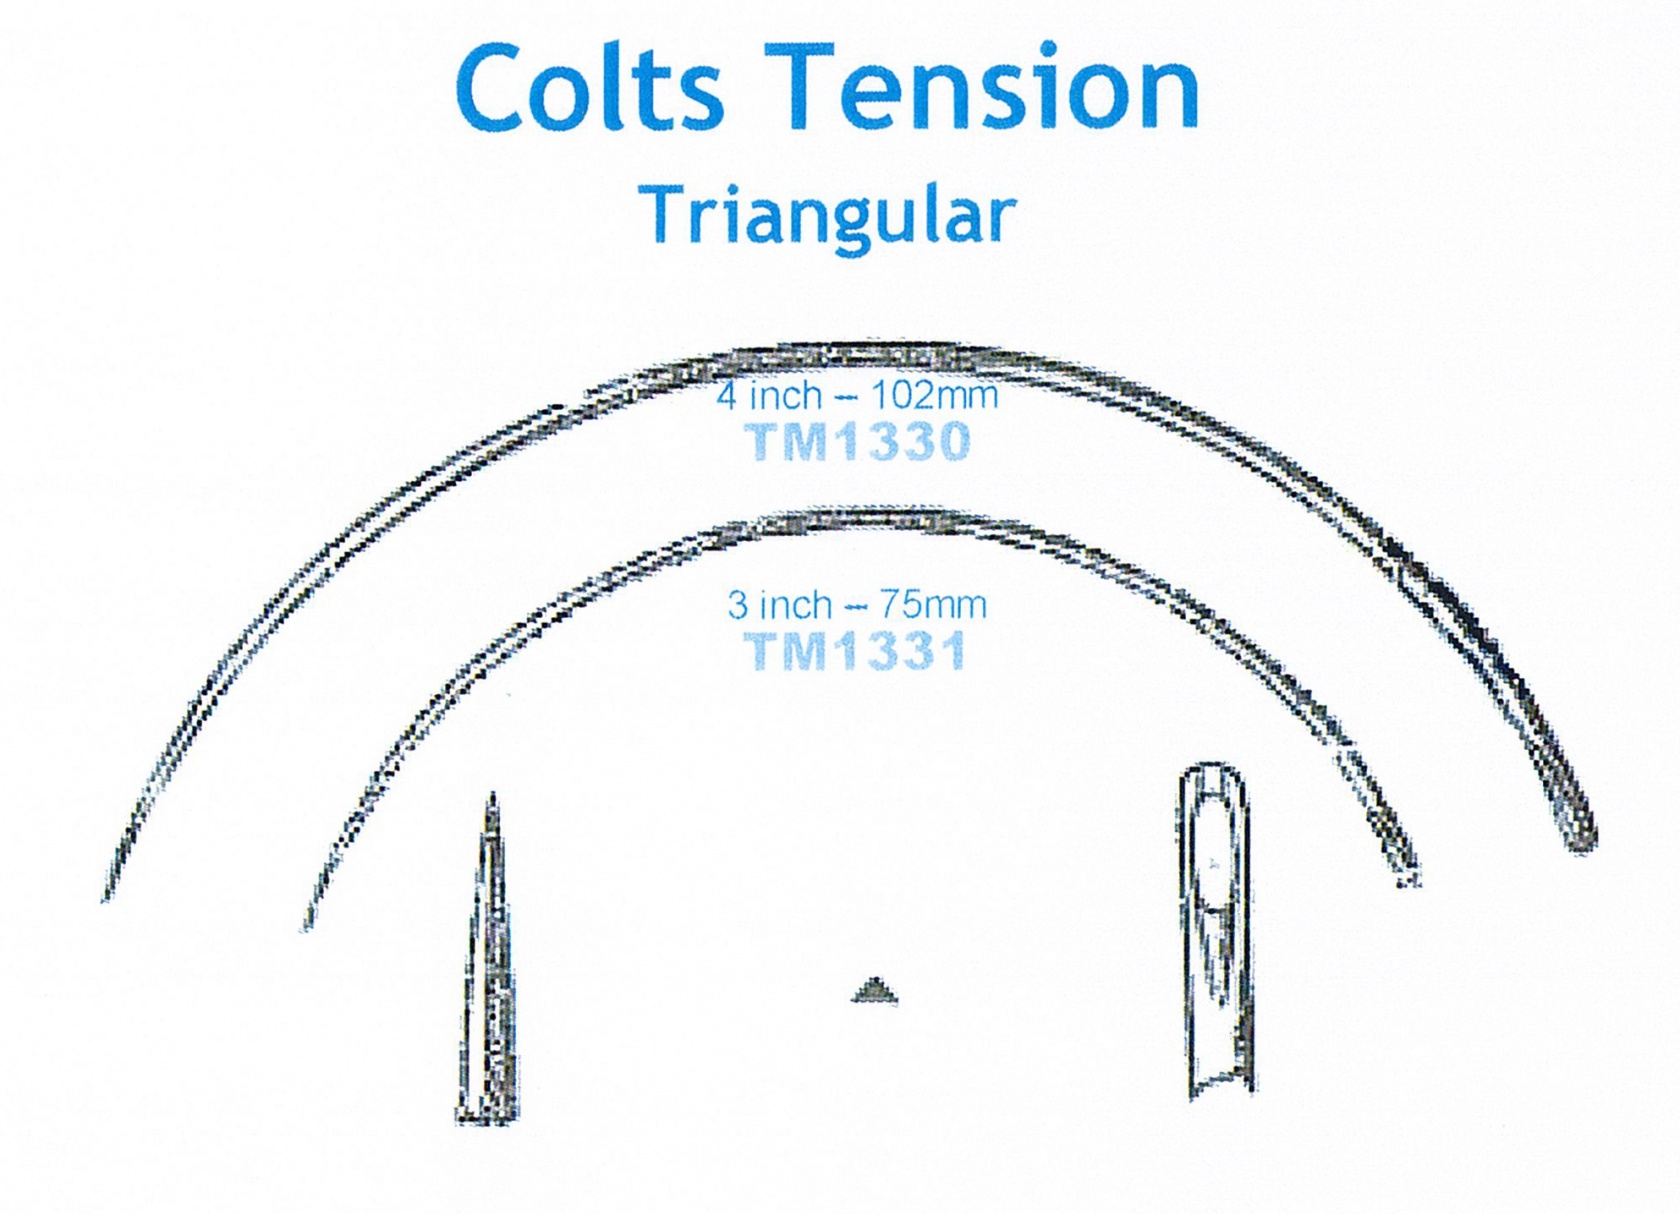 KAT-Eyed Colts Tension Triangular Needle 4 inch Pkt of 2 image 0